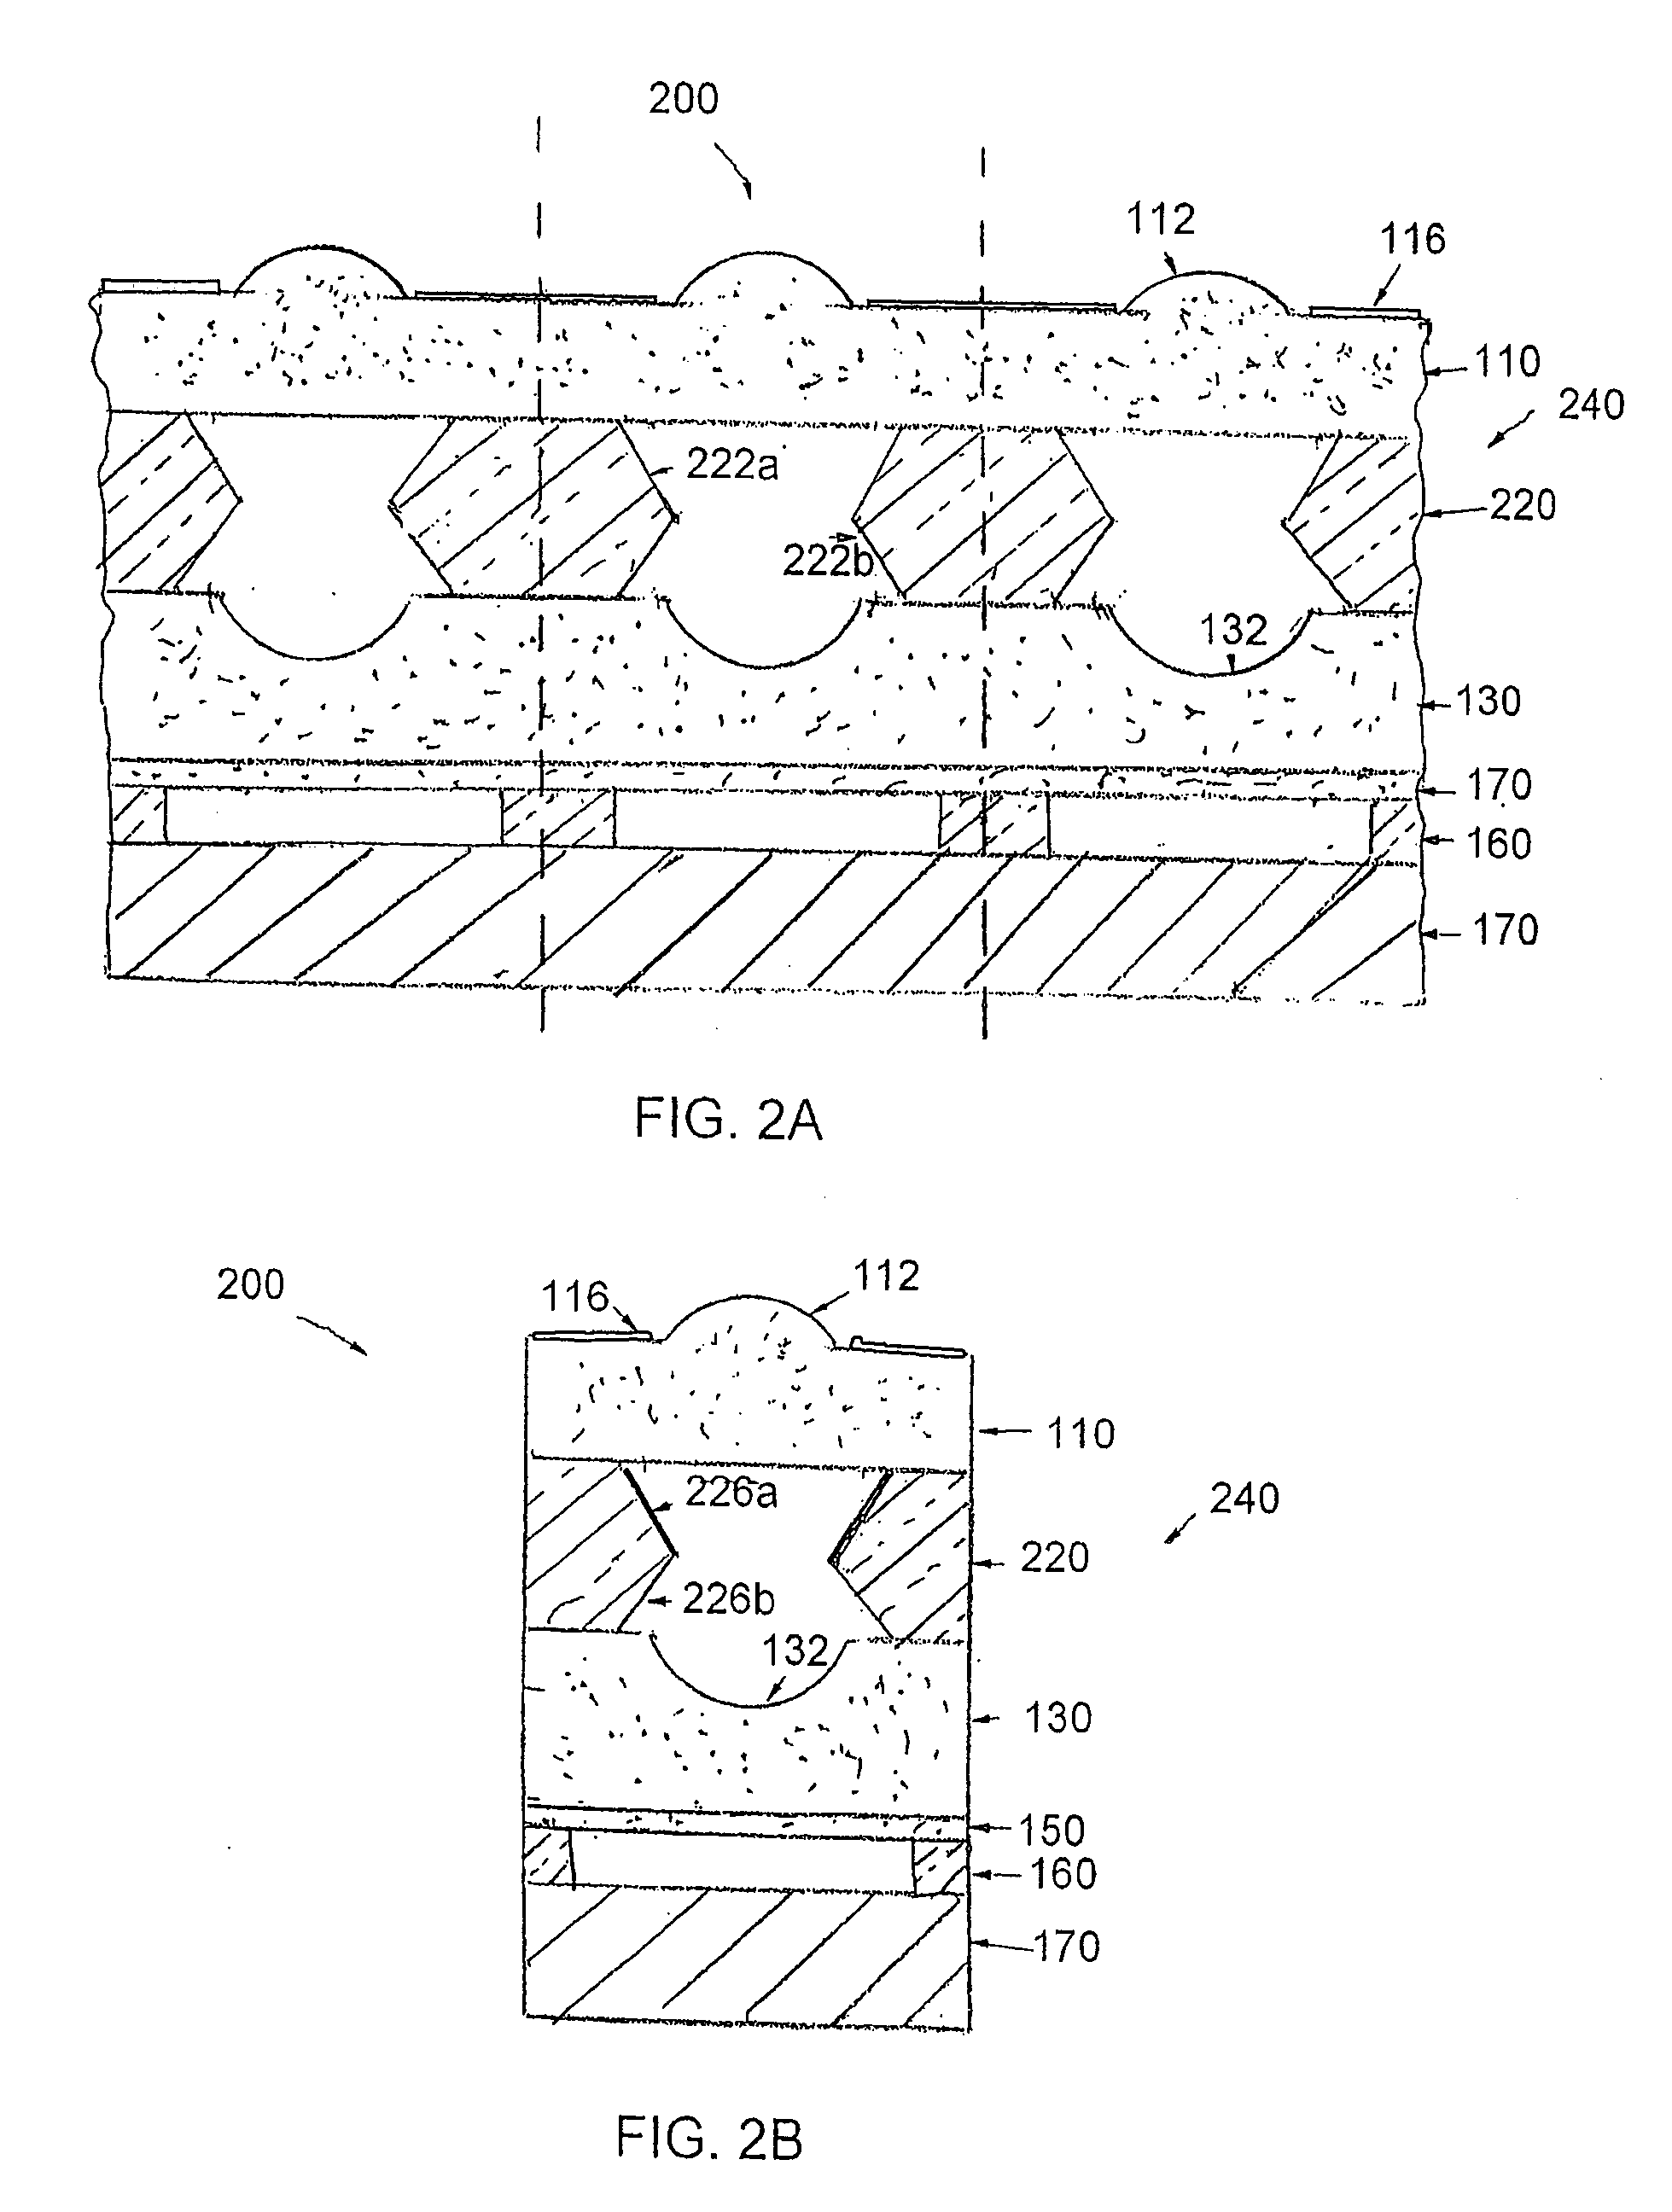 Internal noise reducing structures in camera systems employing an optics stack and associated methods